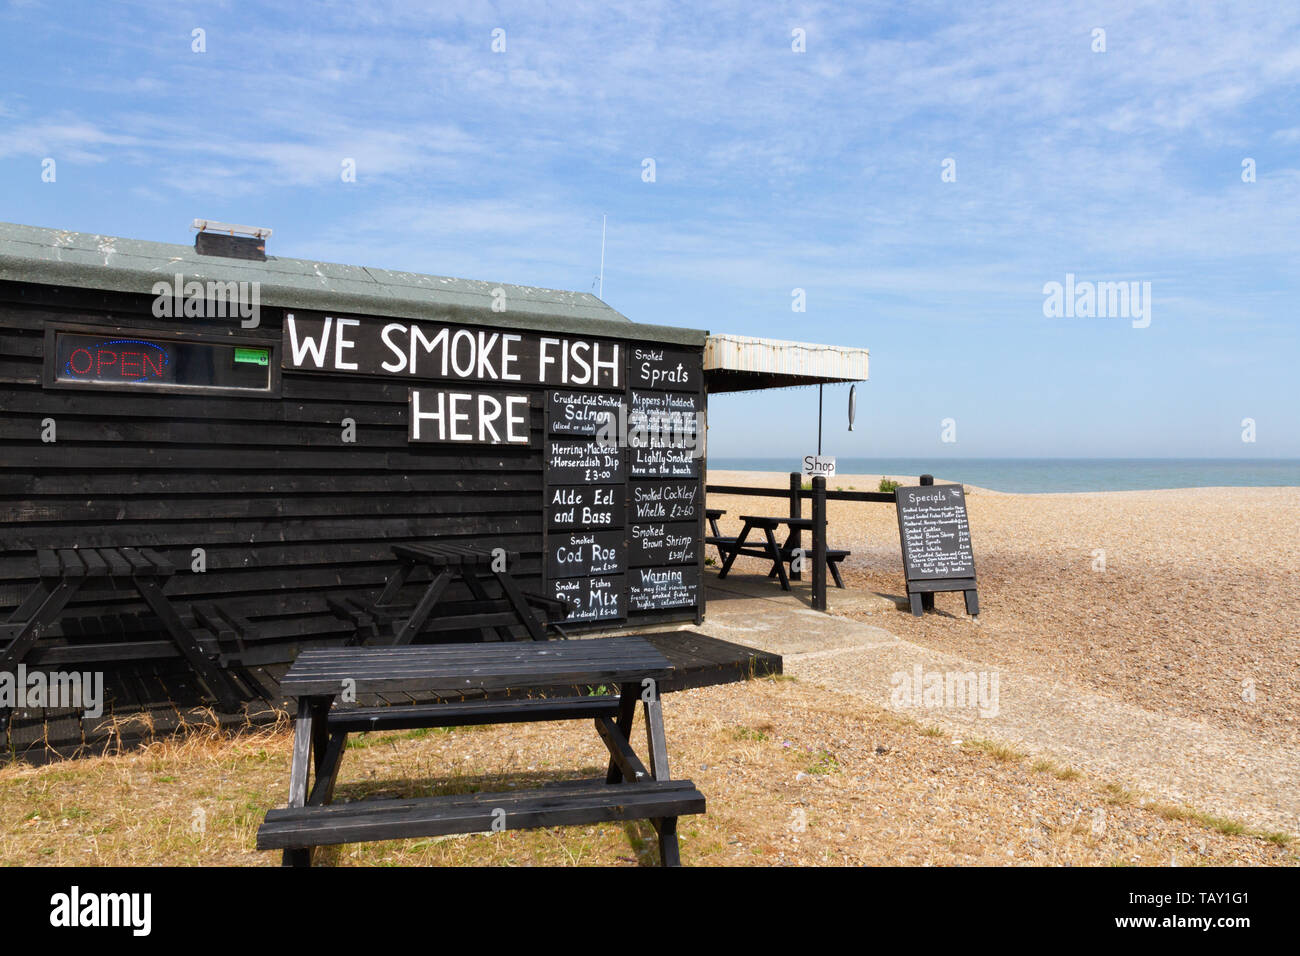 Aldeburgh, Suffolk, UK: On a shingle beach a fish shop with blackboards showing the type of fish for sale on the side of a black wooden shed. Stock Photo